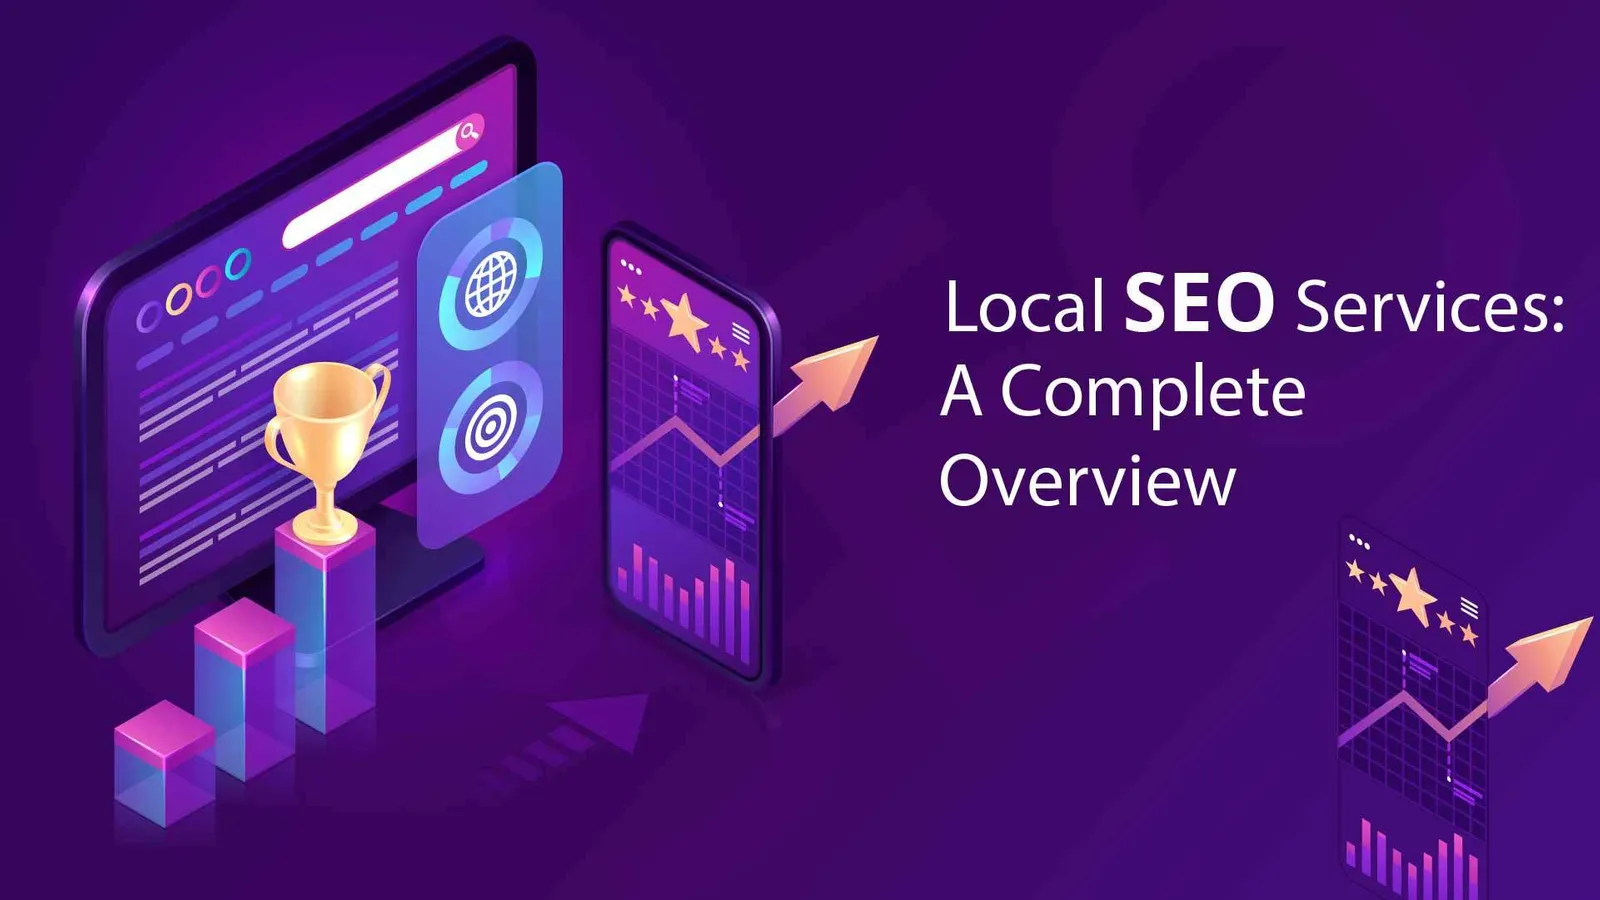 Local SEO Services: A Complete Overview